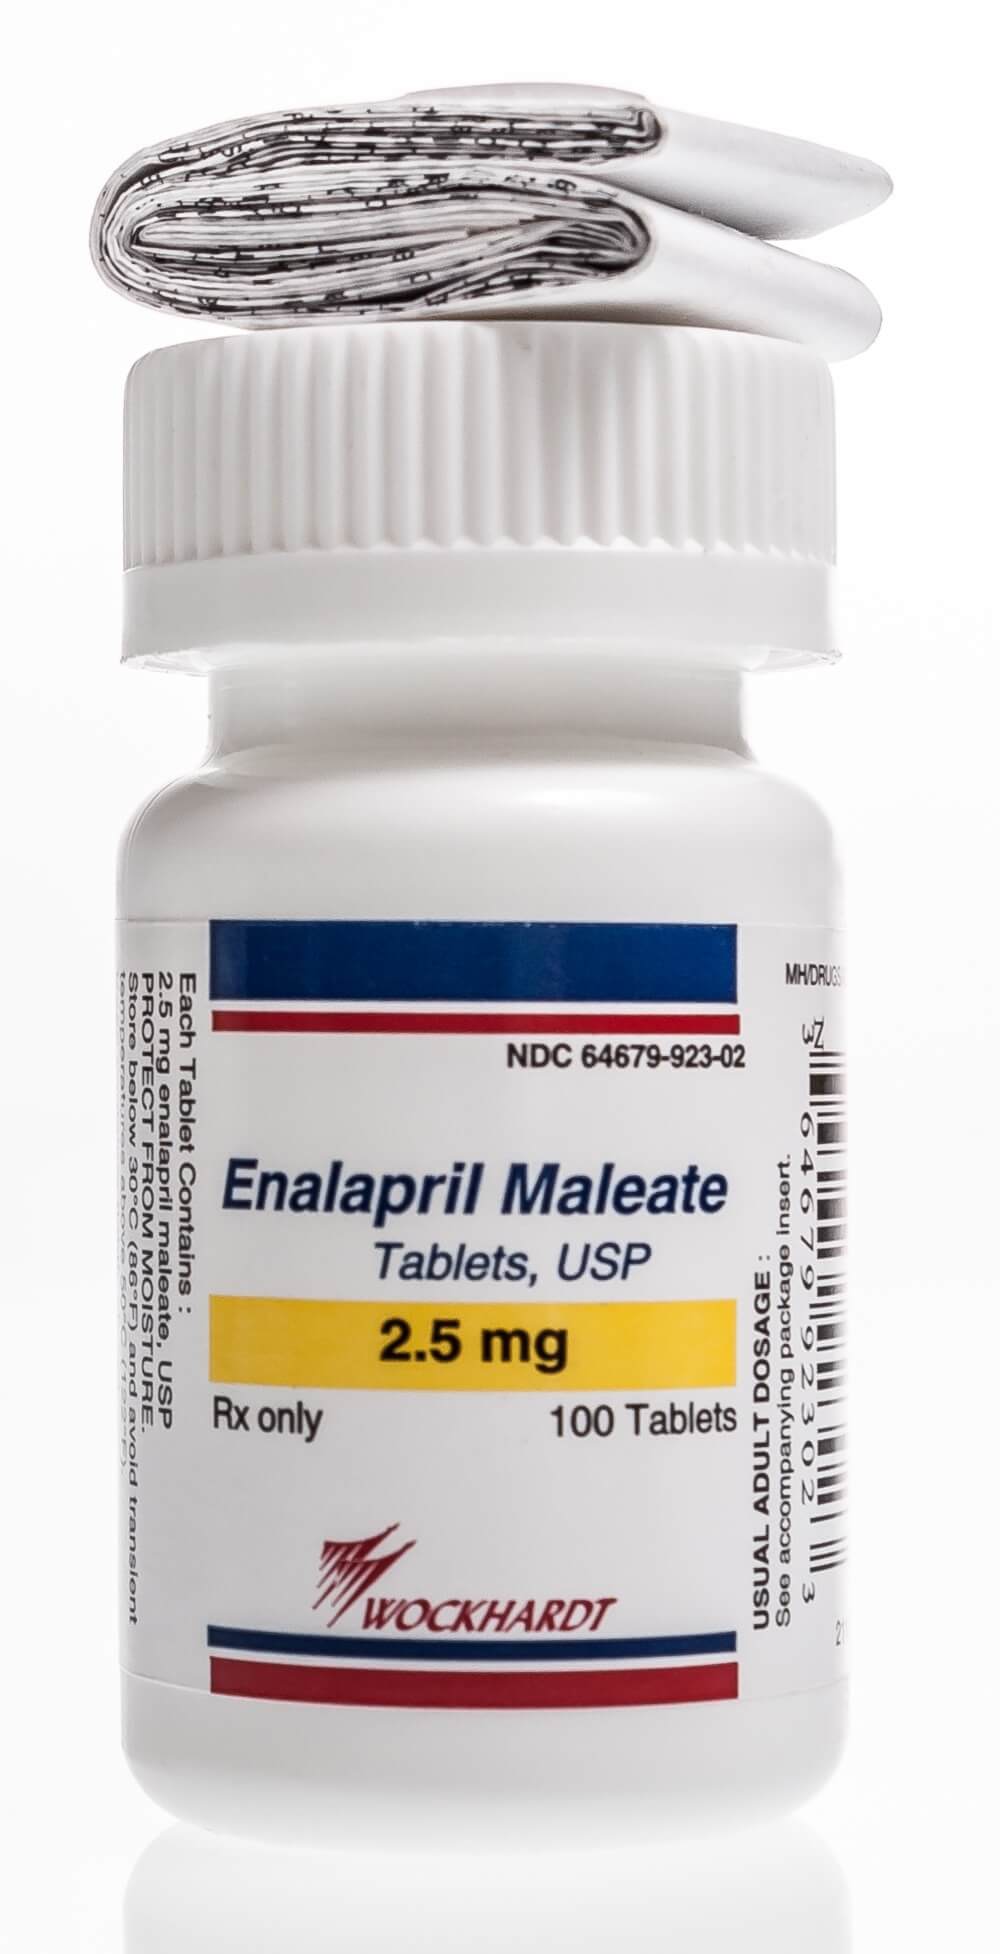 what is enalapril maleate prescription drugs used for